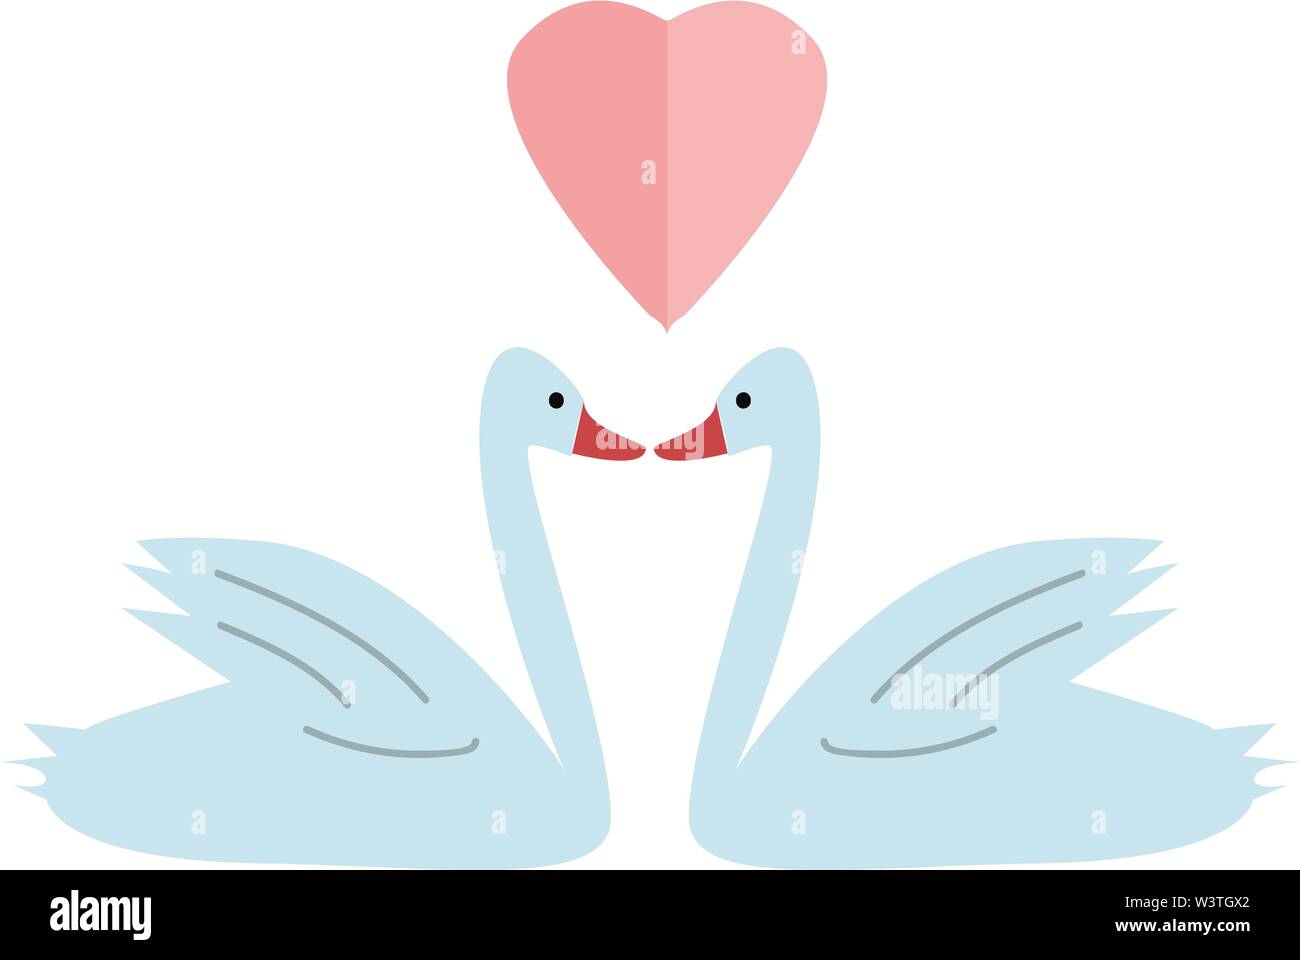 two swan clipart